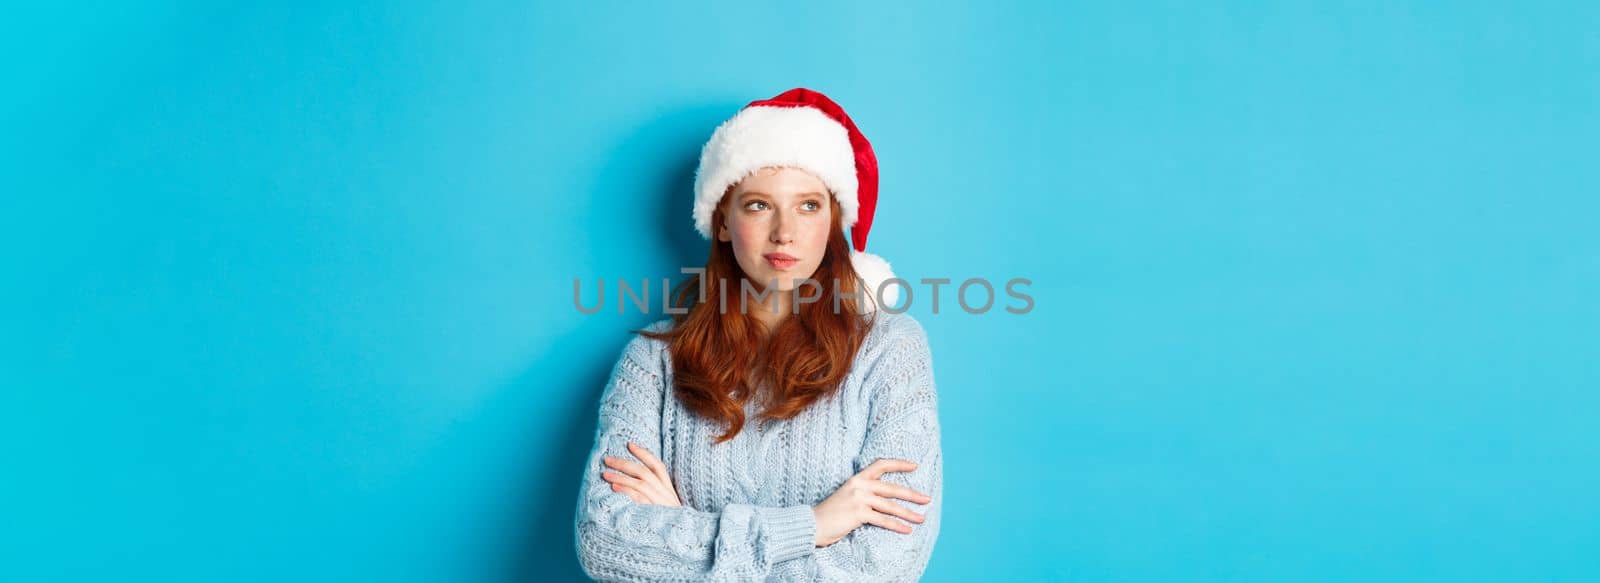 Winter holidays and Christmas Eve concept. Thoughtful redhead woman in Santa hat and sweater, looking left and pondering, making xmas plans, standing over blue background.